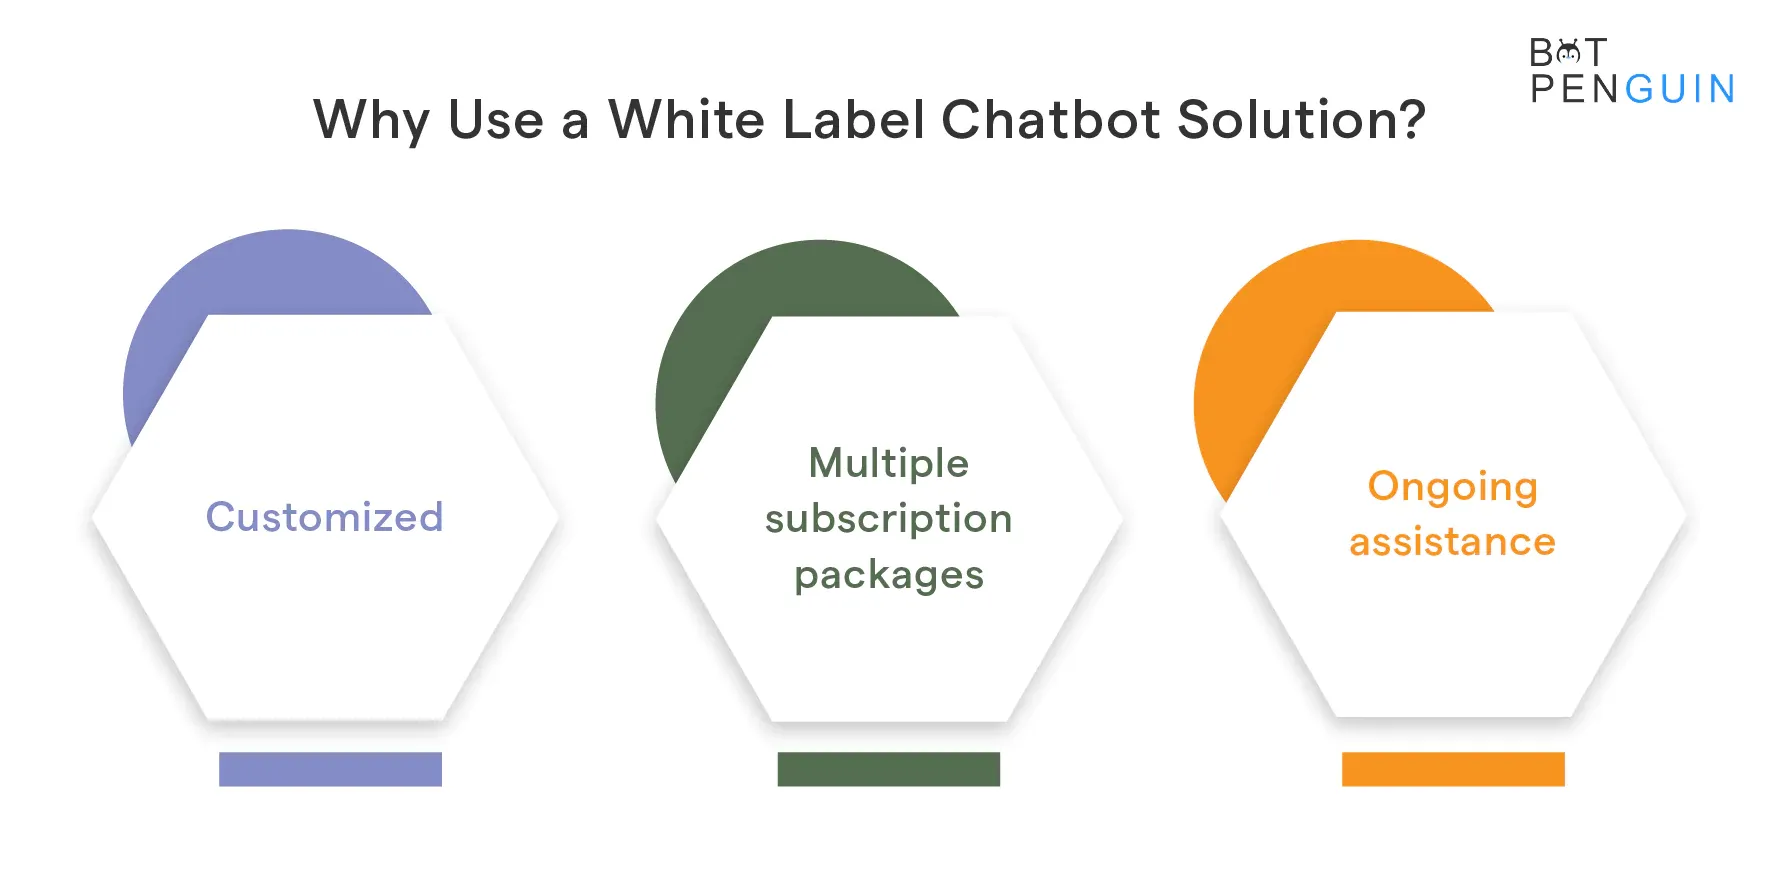 Why Use a White Label Chatbot Solution?